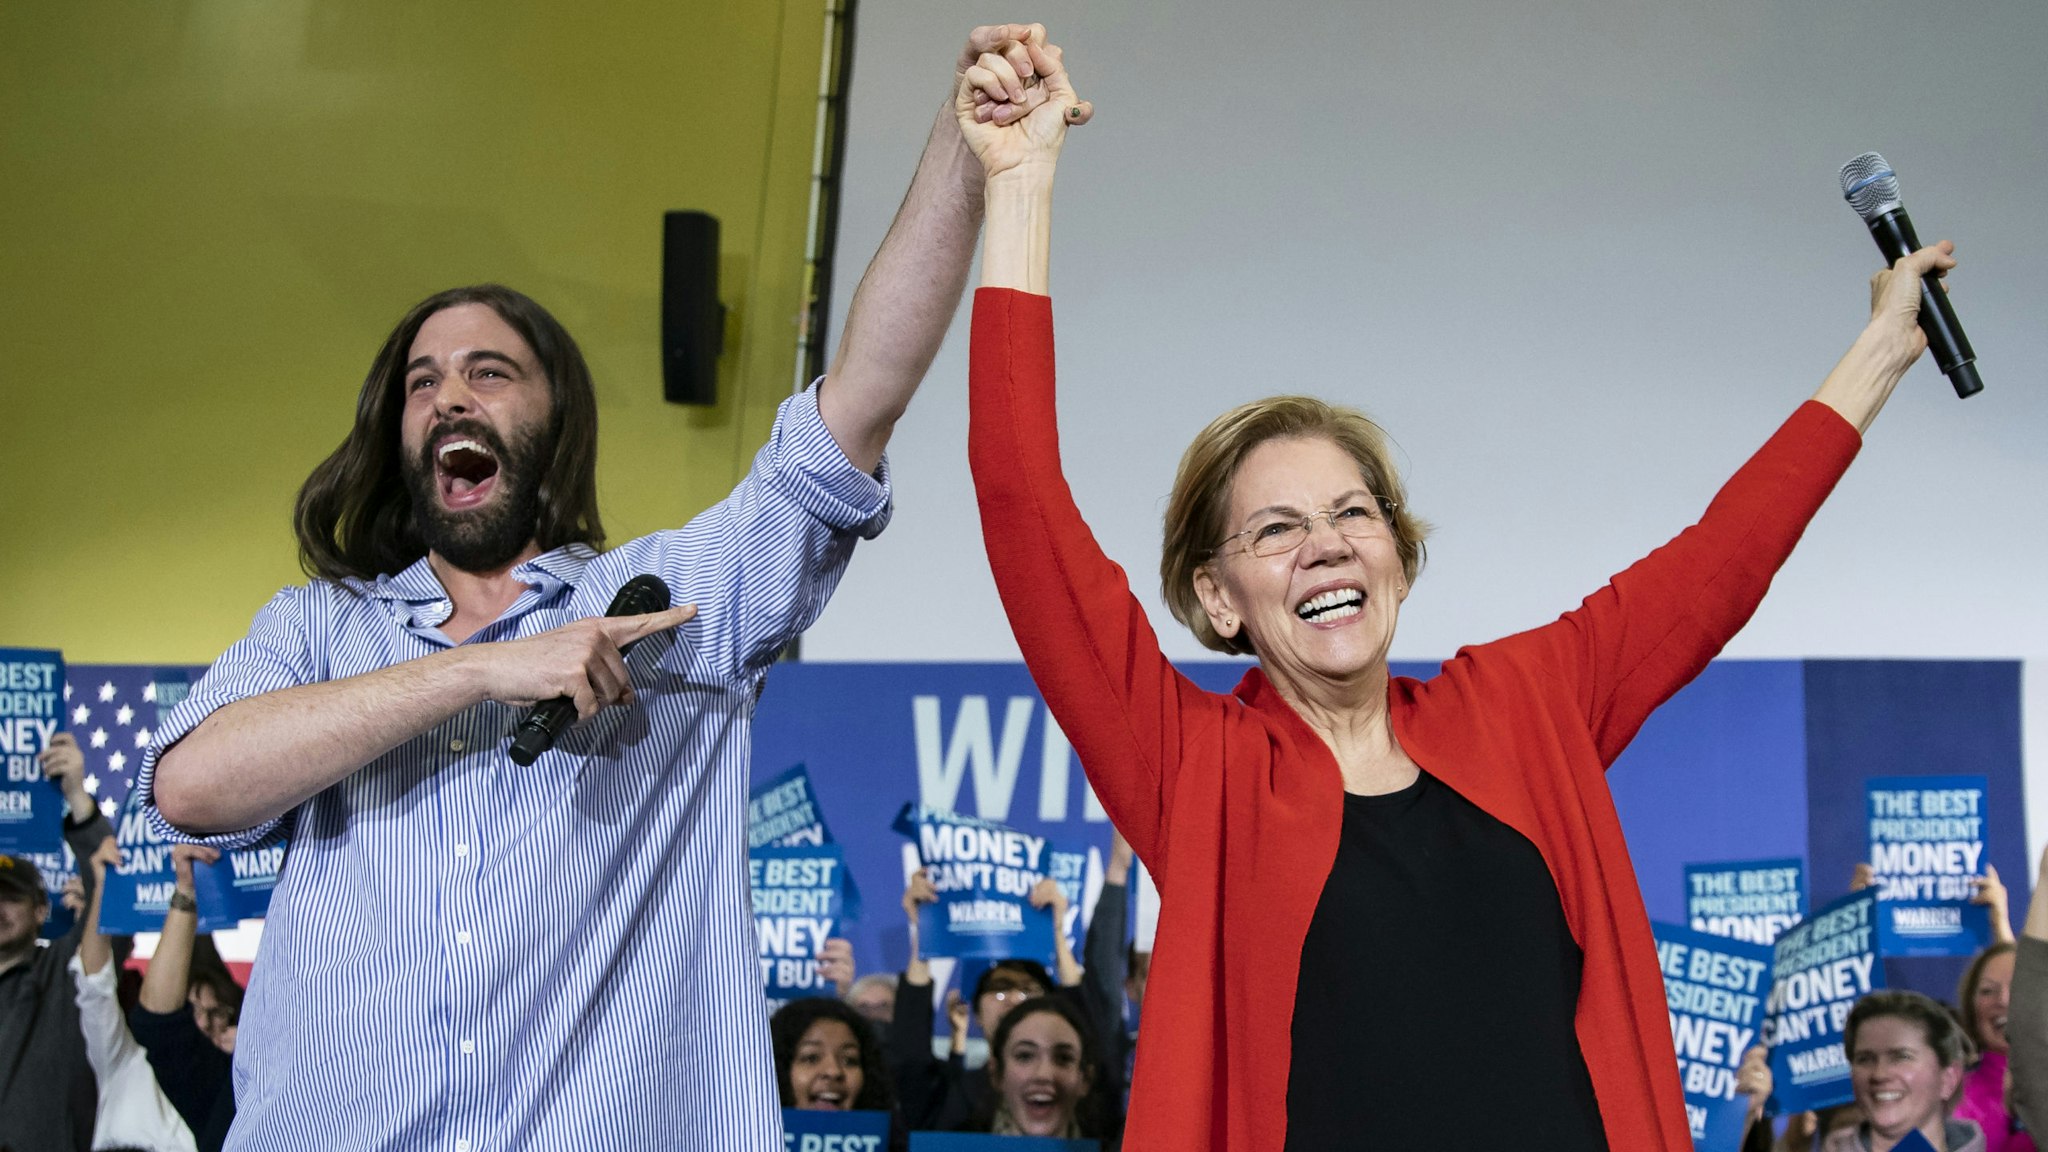 Senator Elizabeth Warren, a Democrat from Massachusetts and 2020 presidential candidate, right, arrives with Jonathan Van Ness, a celebrity hairdresser, during a campaign event in Cedar Rapids, Iowa, U.S., on Sunday, Jan. 26, 2020. The Des Moines Register endorsed progressive favorite Warren a little more than a week before the Iowa caucuses on Feb. 3, saying the Massachusetts lawmaker would "push an unequal America in the right direction."